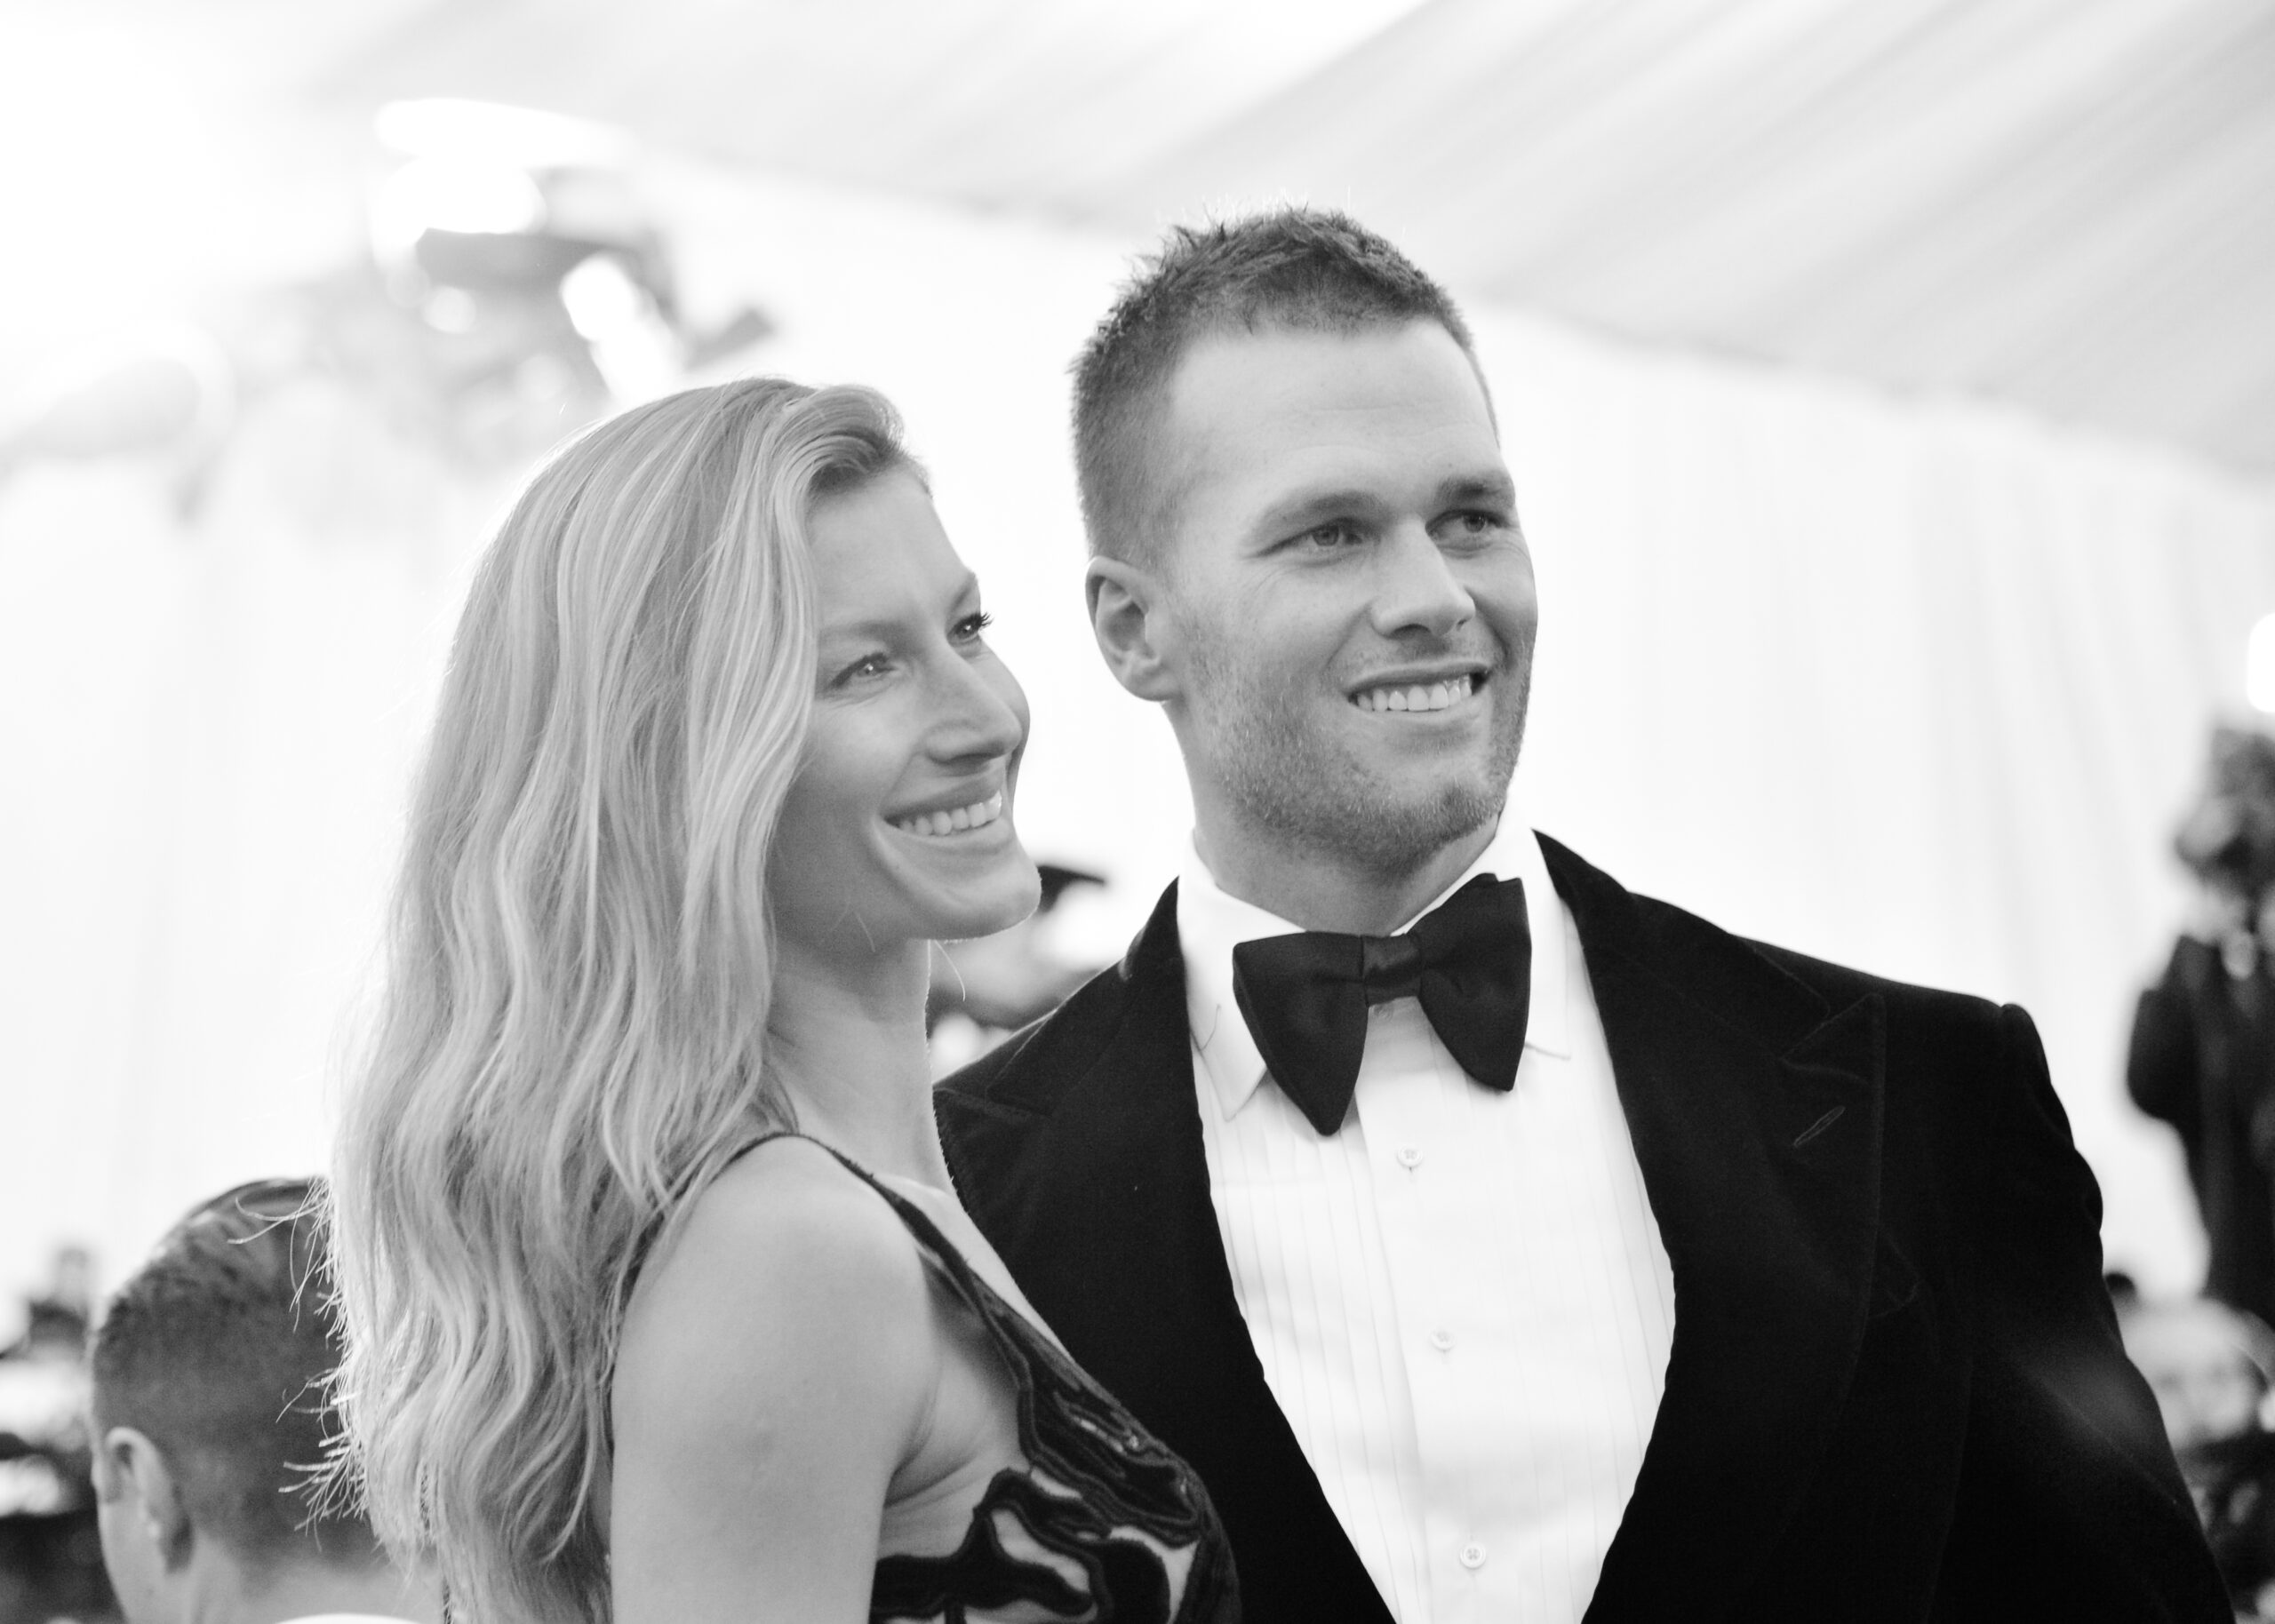 NEW YORK, NY - MAY 05: [EDITOR'S NOTE: Image has been digitally processed] Gisele Bndchen and Tom Brady attend the 